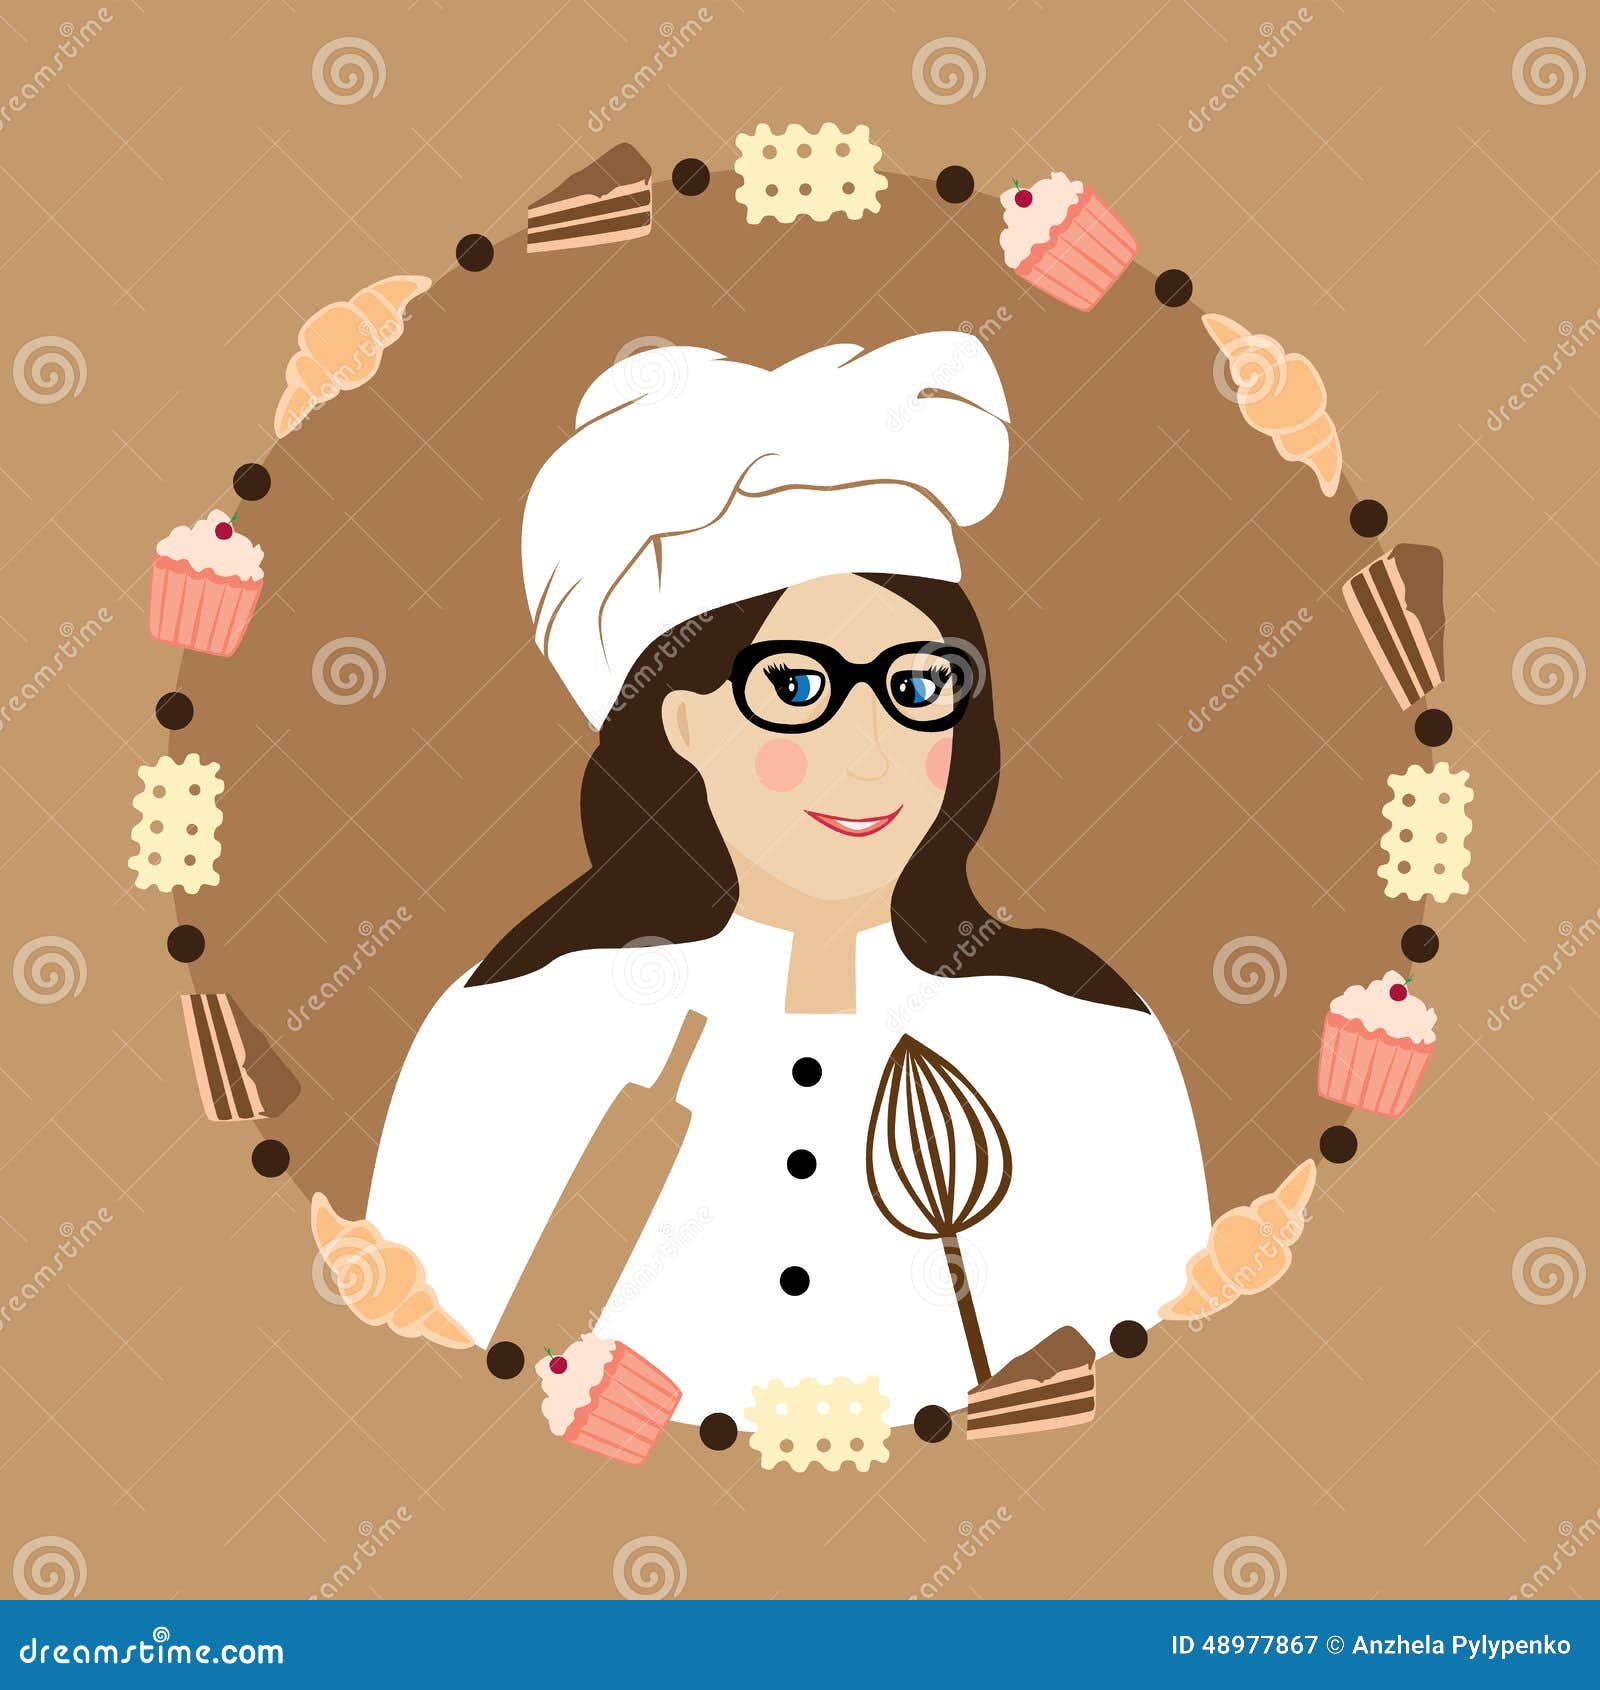 Women Baker Silhouette Collection Wearing Chef Uniforms. Female Bakery ...